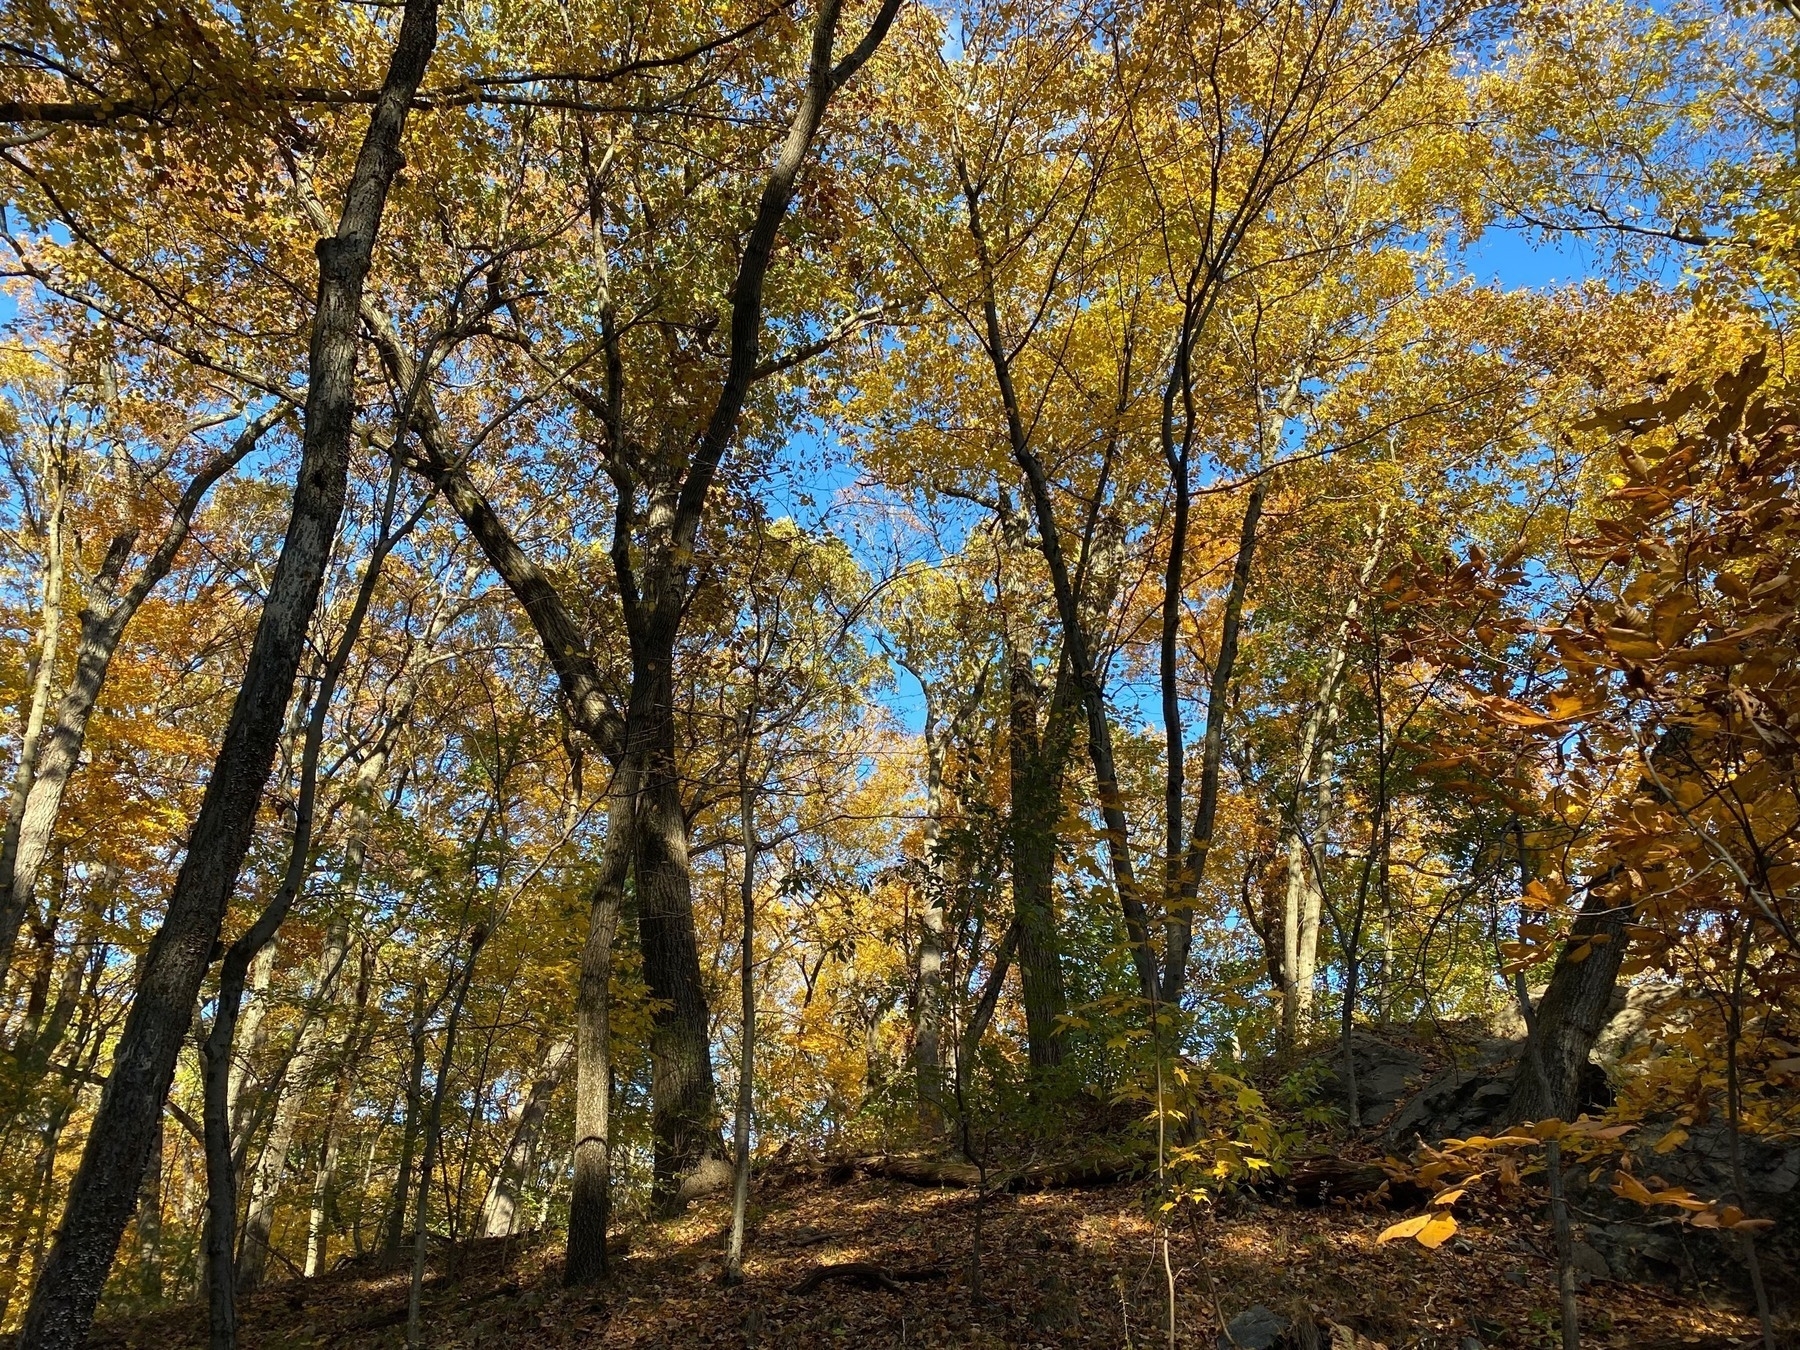 View of a hillside covered in trees with yellow fall foliage.